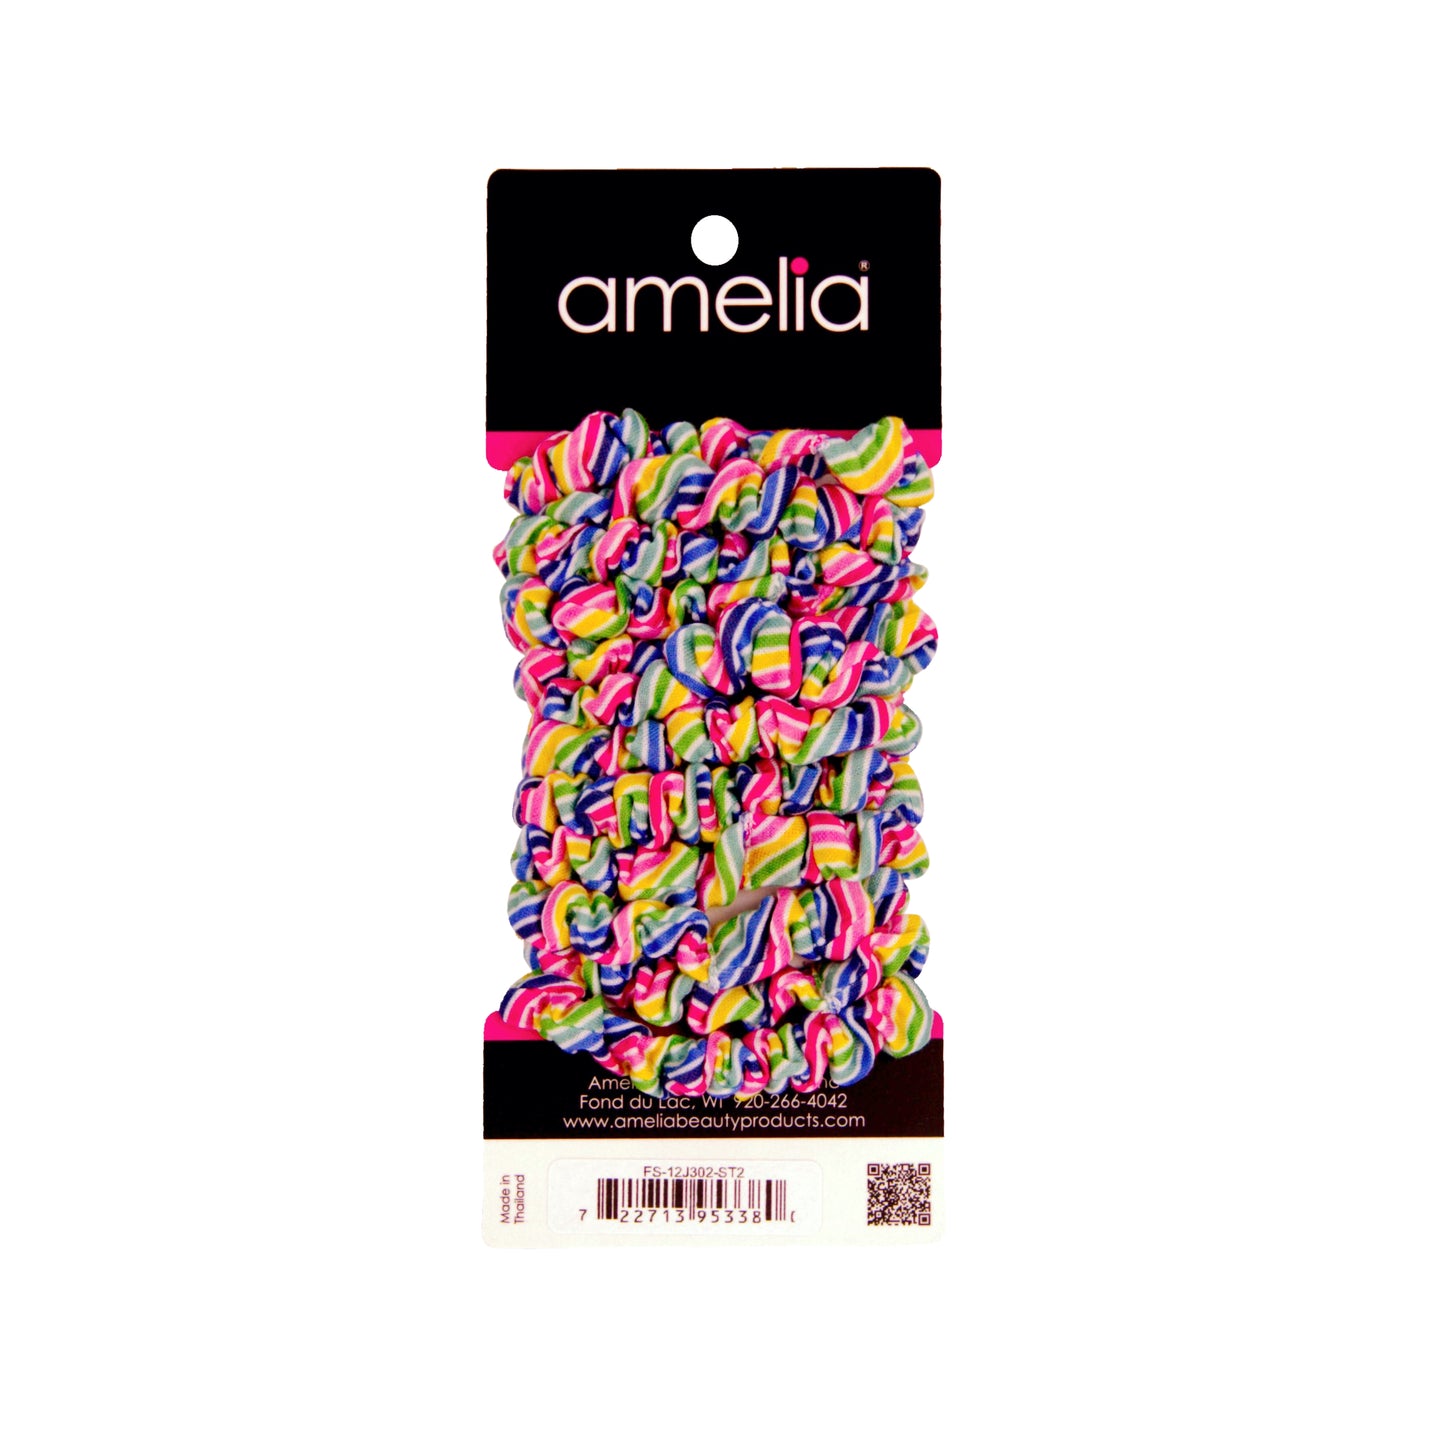 Amelia Beauty, Rainbow Stripe Jersey Scrunchies, 2.25in Diameter, Gentle on Hair, Strong Hold, No Snag, No Dents or Creases. 12 Pack